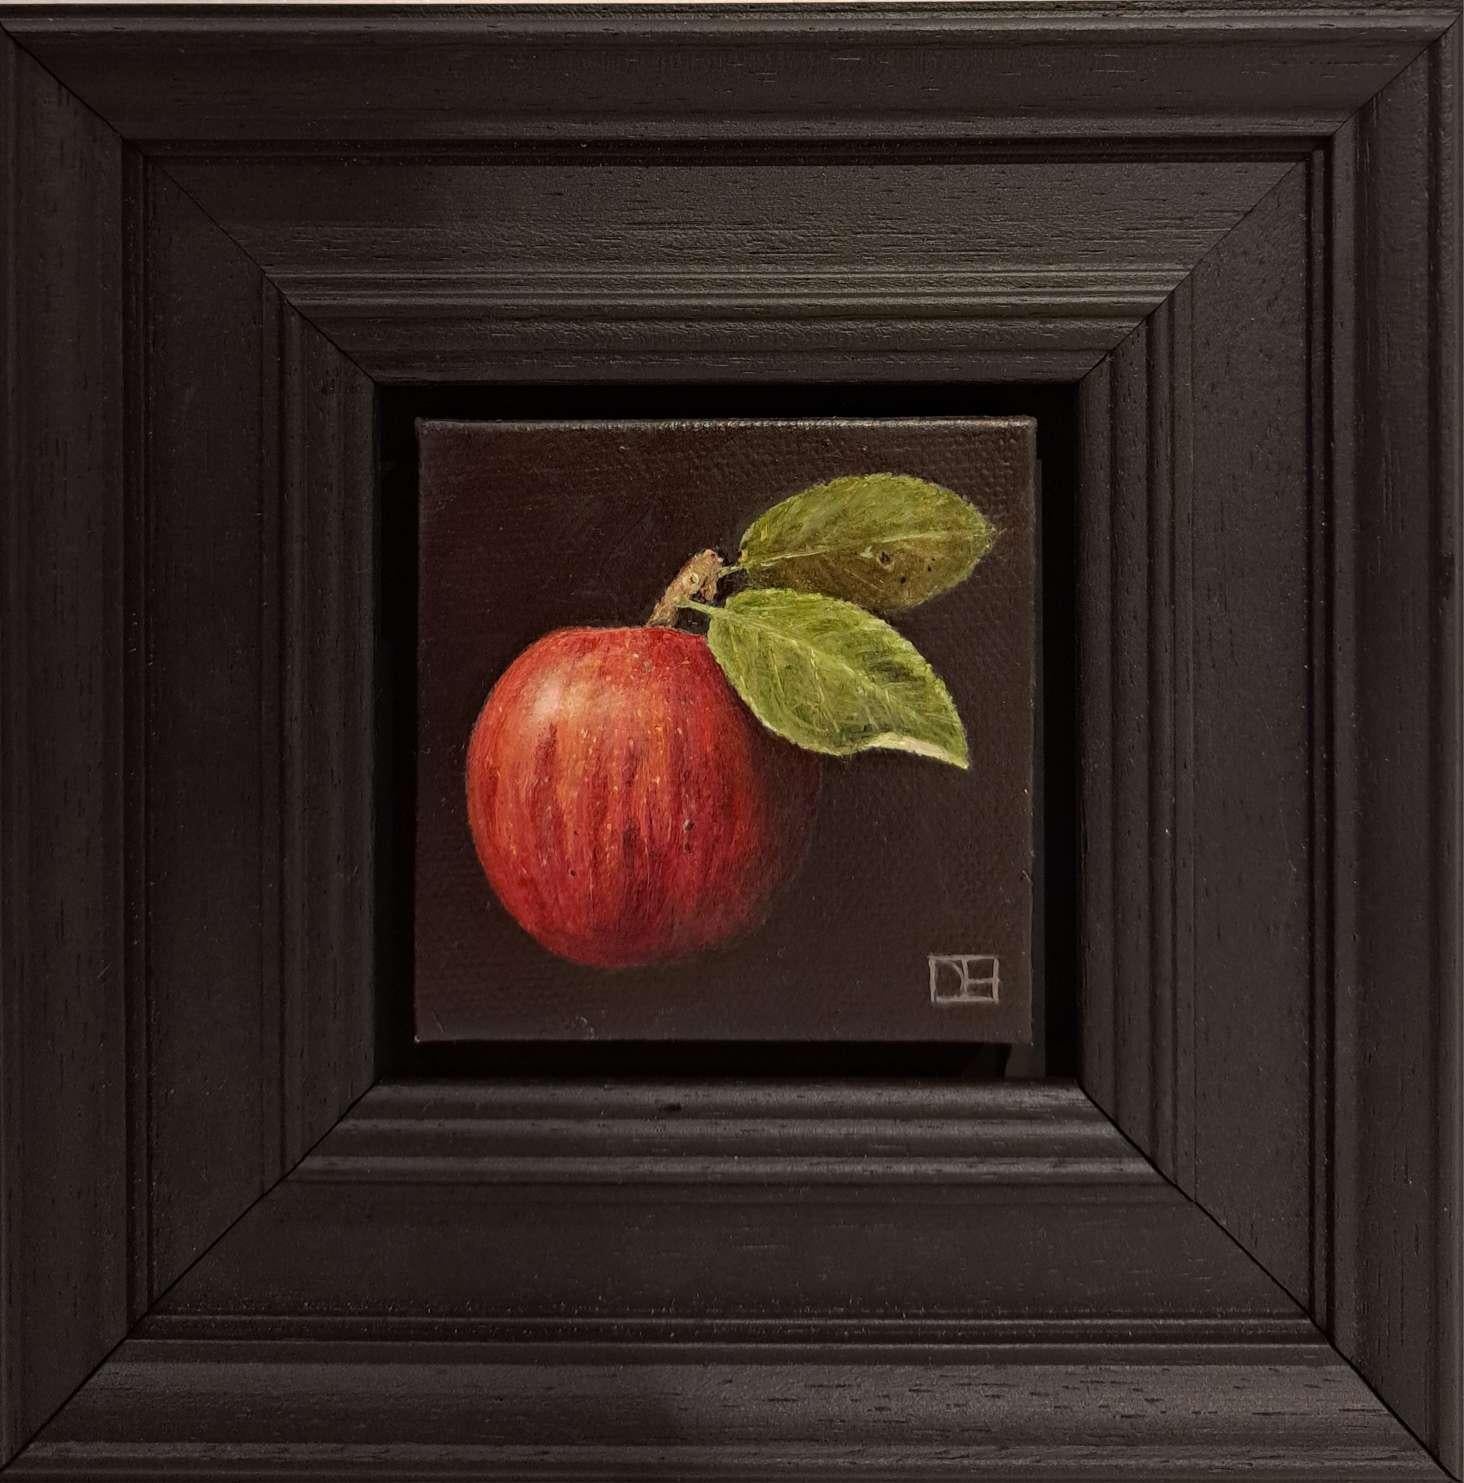 Pocket Gala Apple [2023]

Pocket Tangerine is an original oil painting by Dani Humberstone as part of her Pocket Painting series featuring small scale realistic oil paintings, with a nod to baroque still life painting. The paintings are set in a